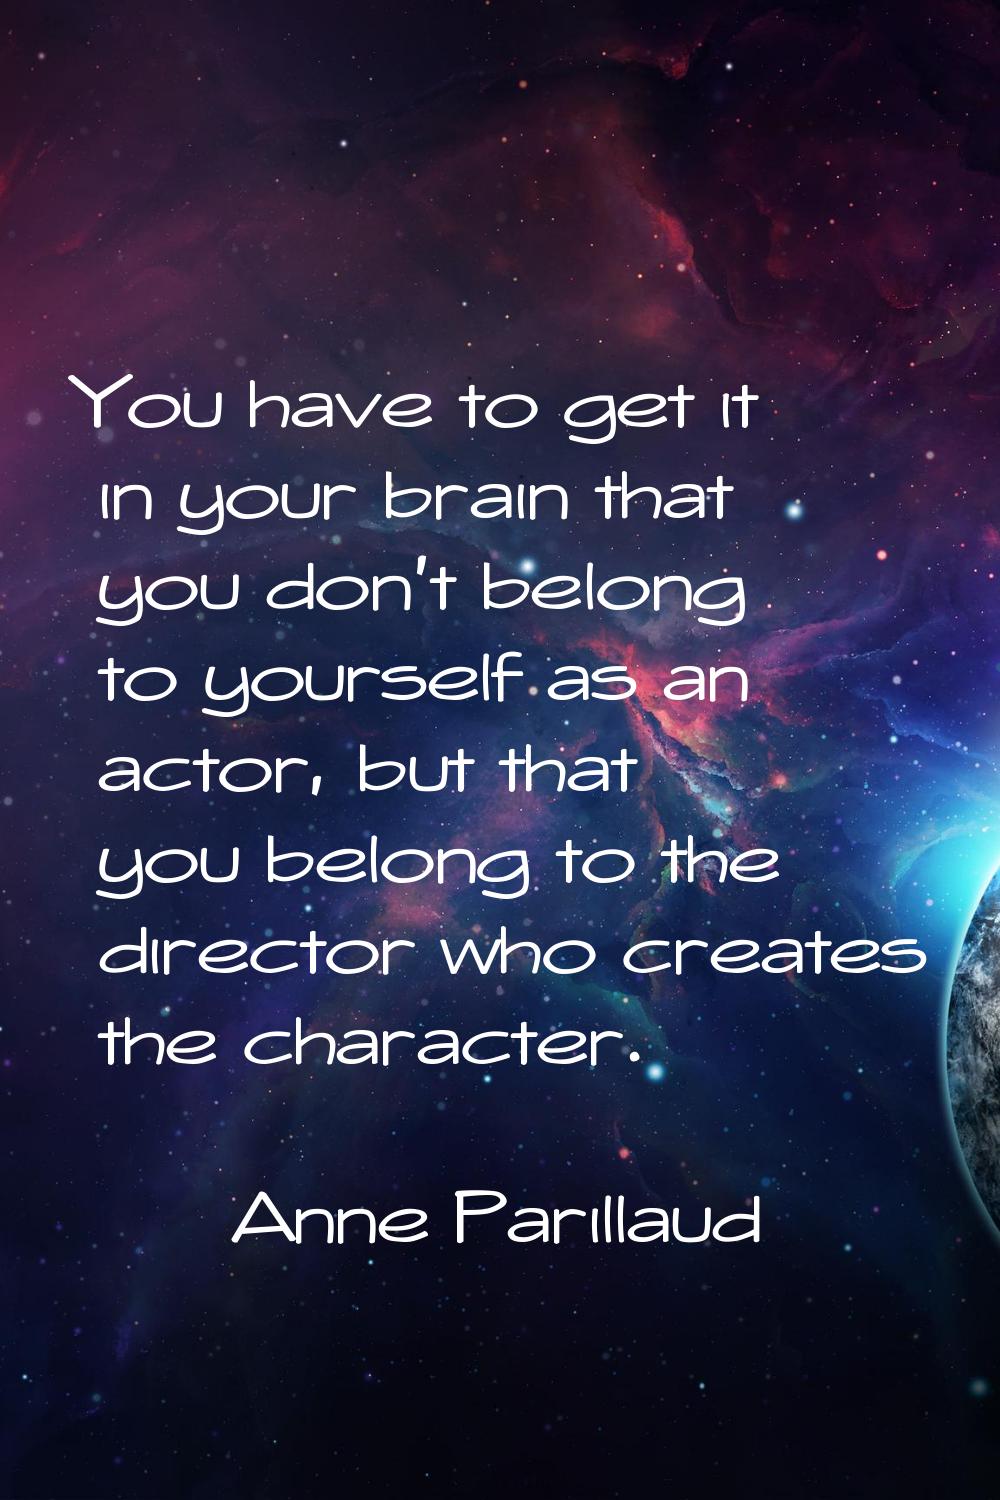 You have to get it in your brain that you don't belong to yourself as an actor, but that you belong